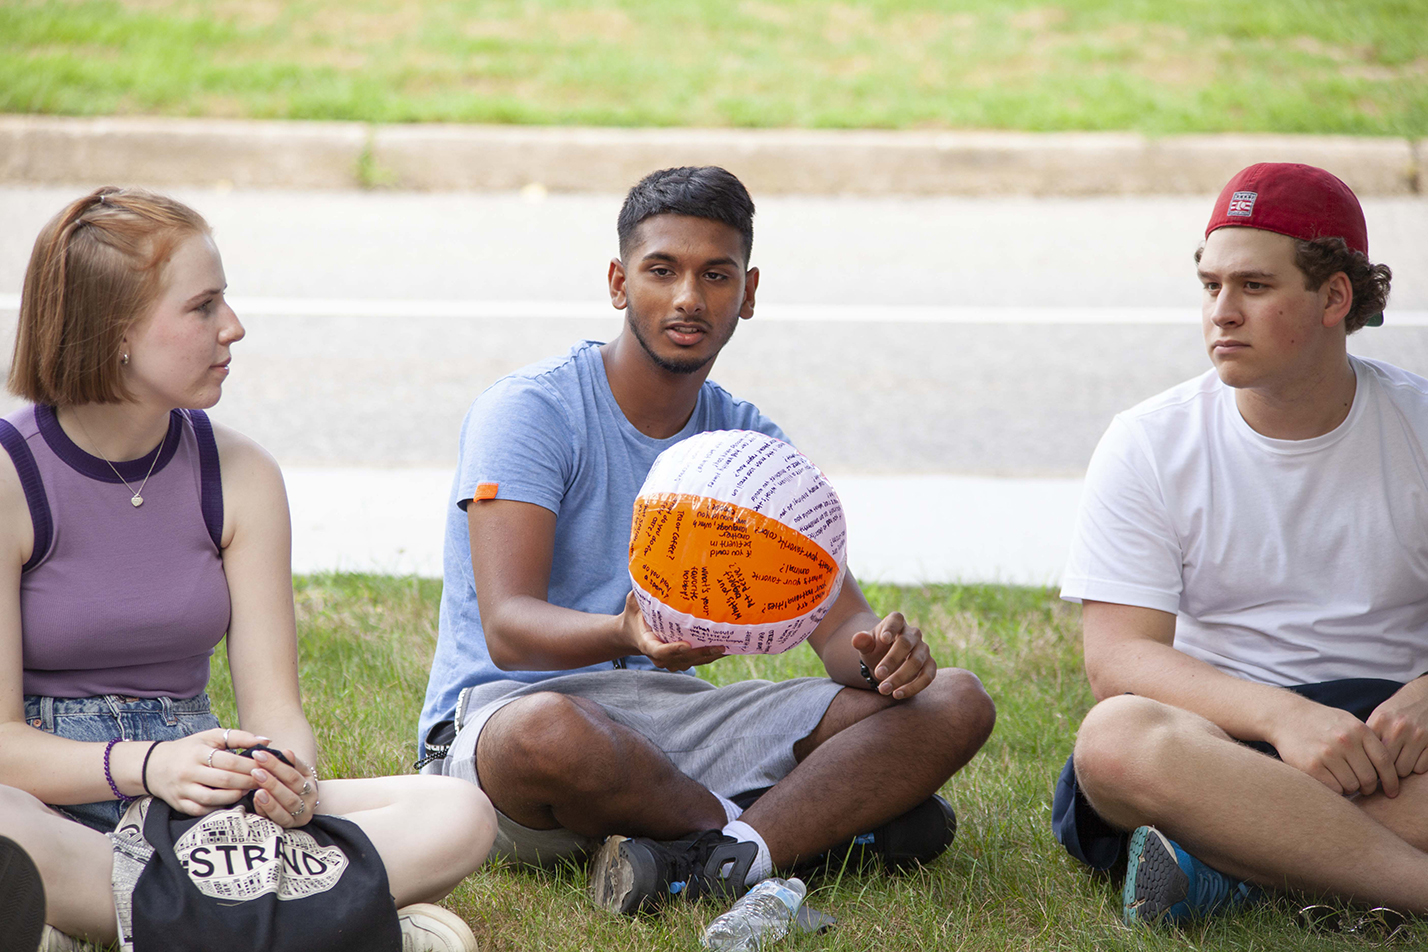 A student passes a beach ball during an ice-breaker activity.